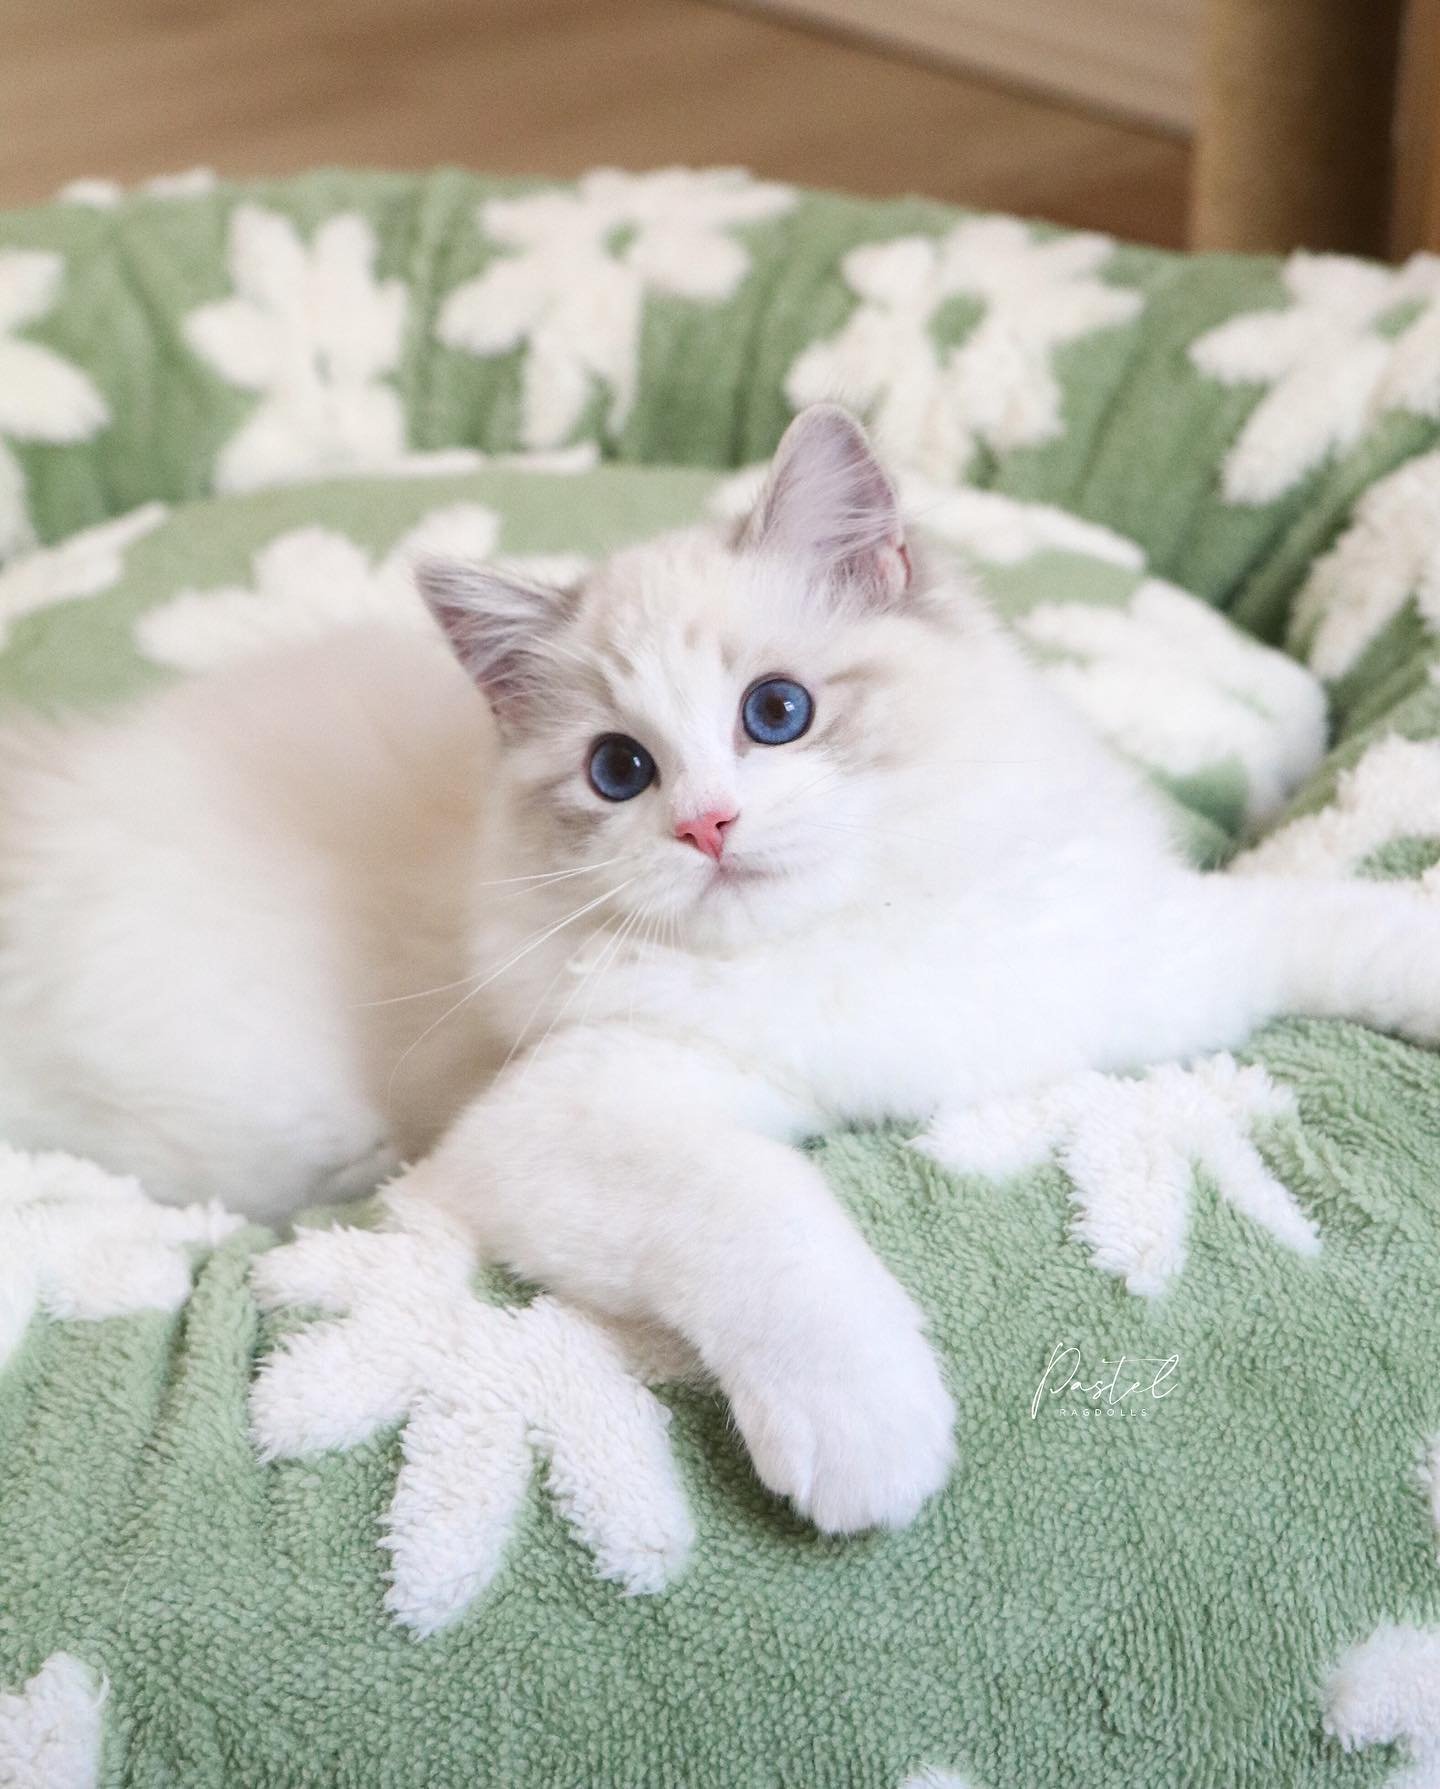 Before our feed is filled with our upcoming babies, I thought I&rsquo;d officially introduce our homebred keeper girl! Meet Pastel Ragdolls Poppy 🌷 (previously &ldquo;Salt&rdquo; from Azalea + Remi&rsquo;s Salt &amp; Pepper Litter).
-
Poppy is a 4.5